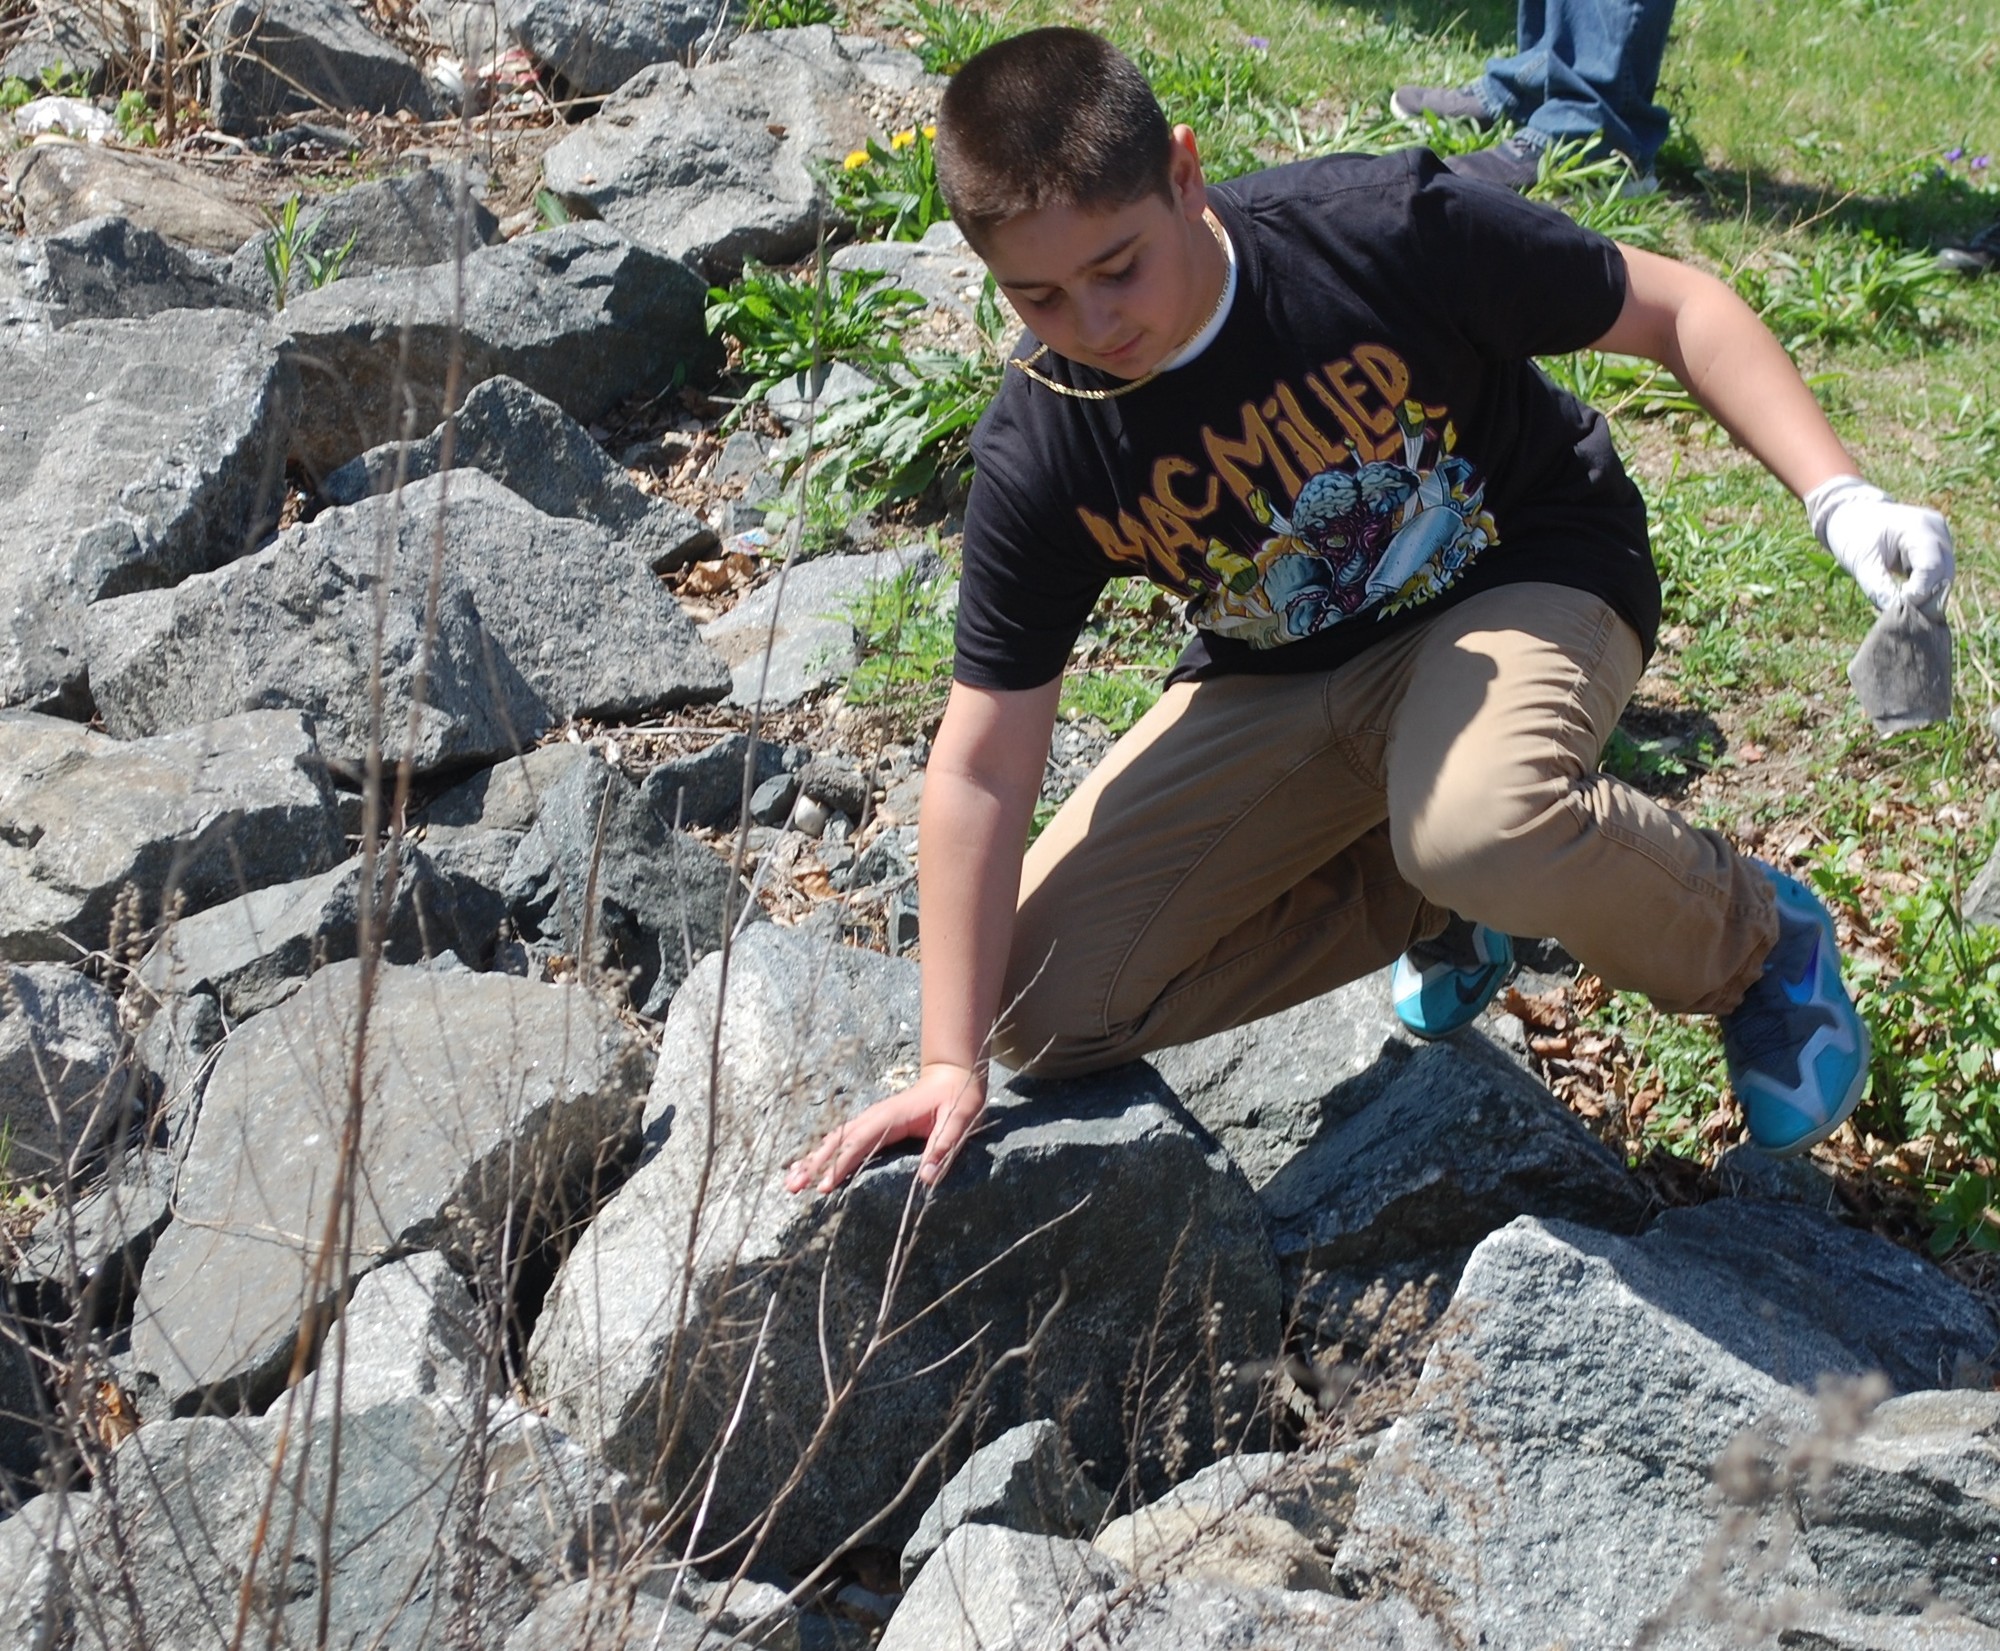 Vinny Tudisco scaled the rocks to collect garbage.